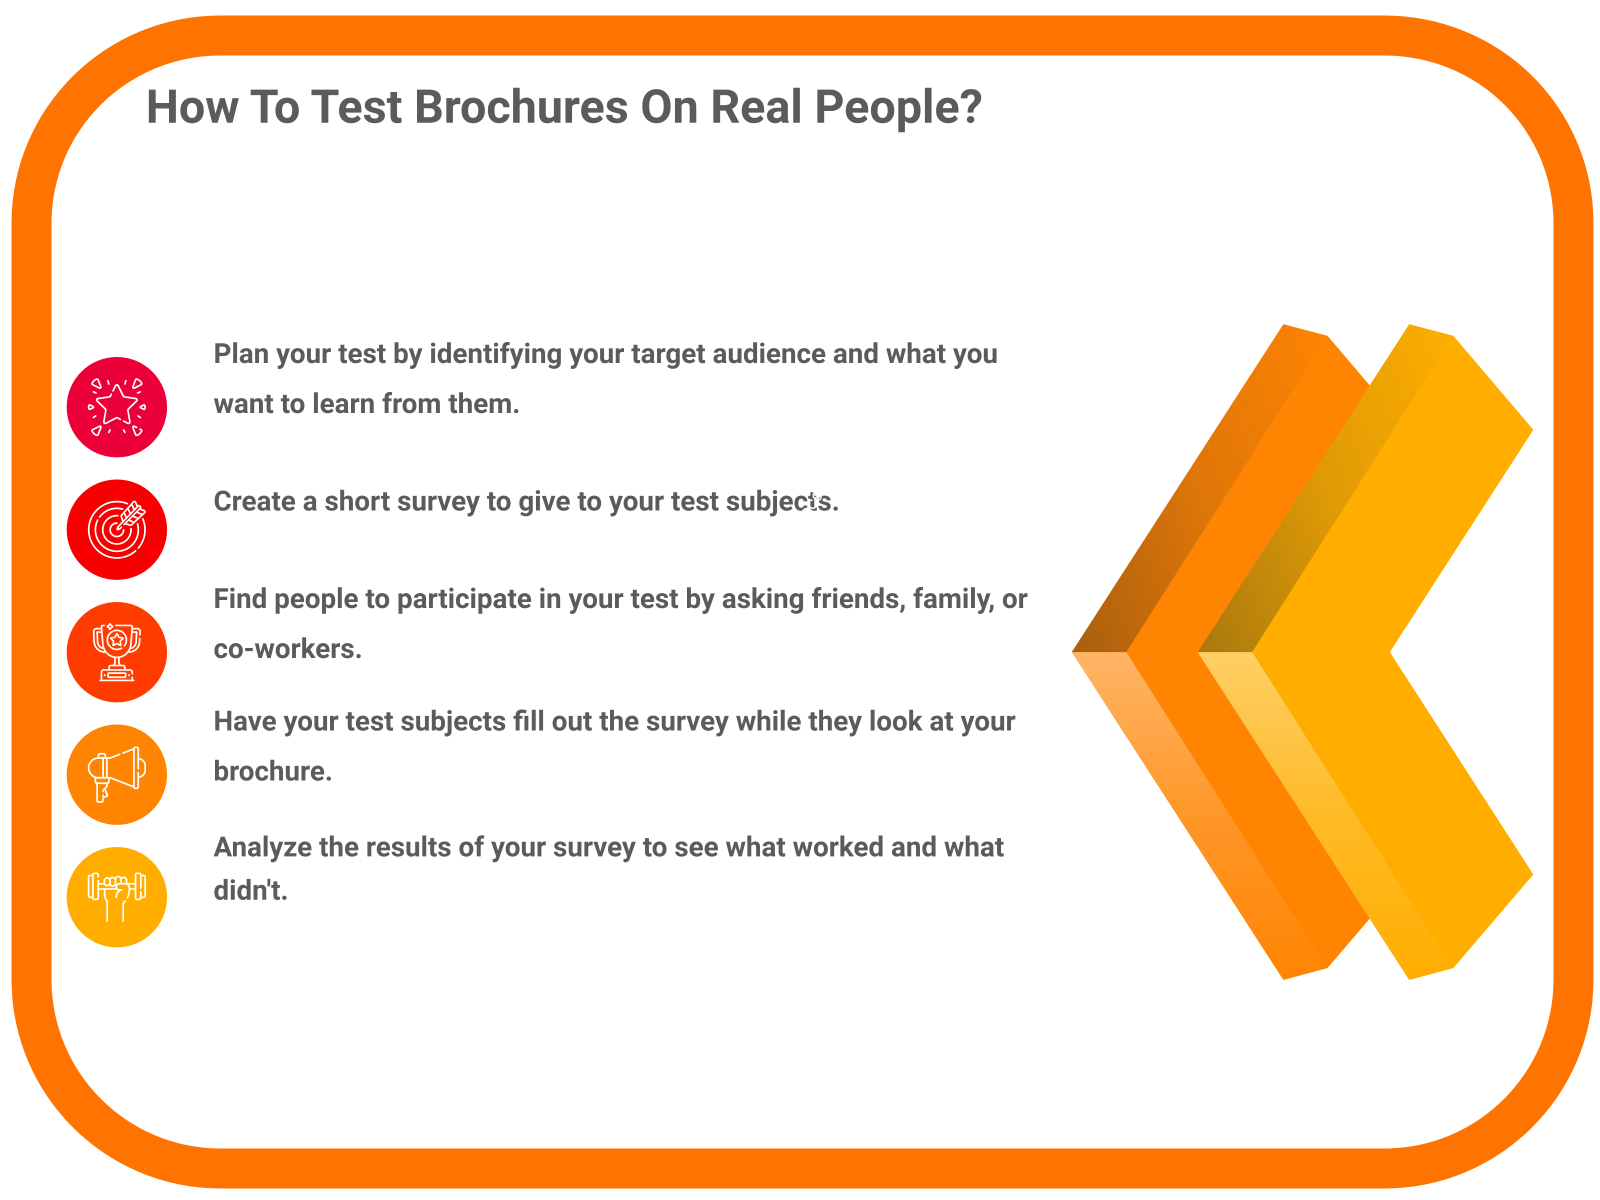 How To Test Brochures On Real People?